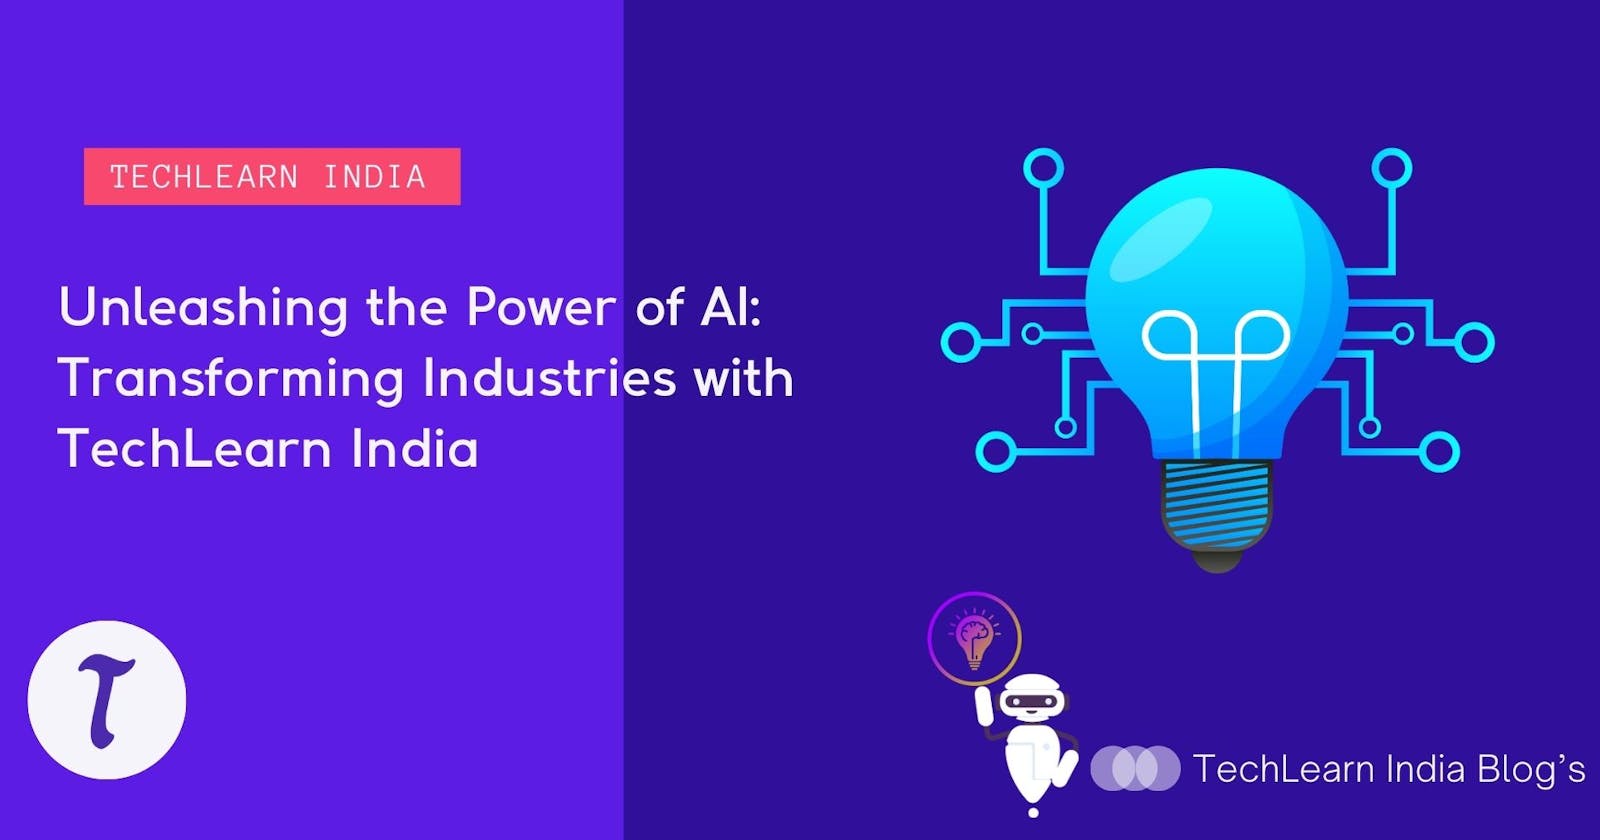 Unleashing the Power of AI: Transforming Industries with TechLearn India